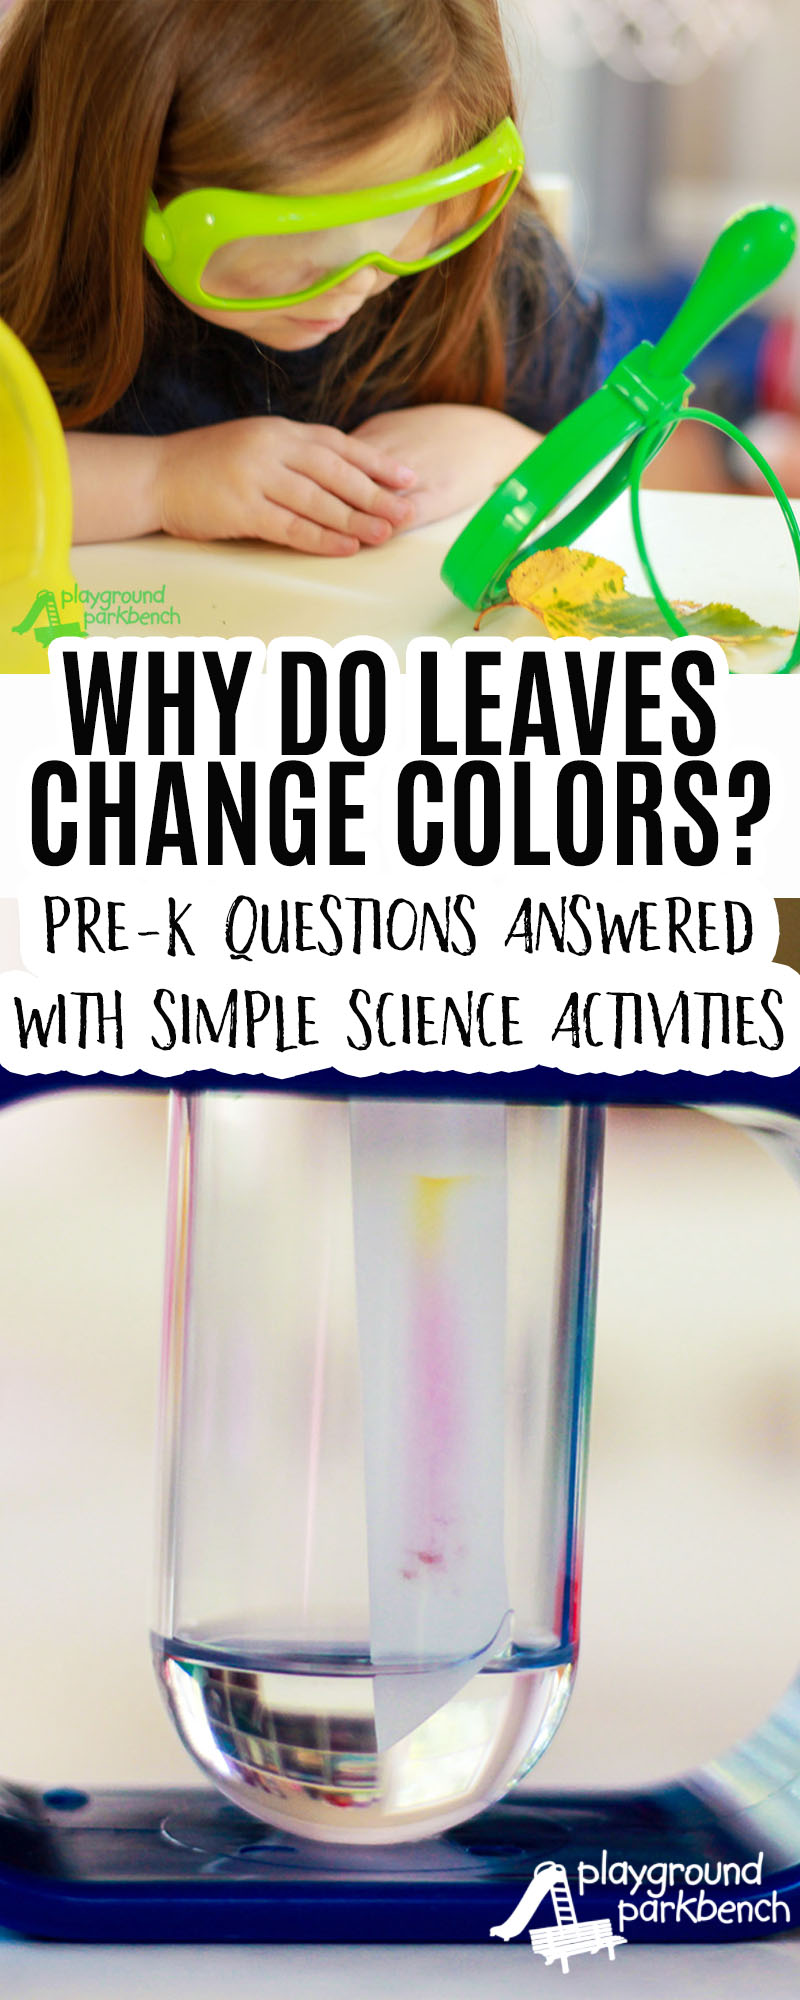 Learn the science behind Fall Leaves with this simple science activity for children. | STEM | STEAM | Science for Kids | Preschool STEM | Autumn | Why do leaves change color?